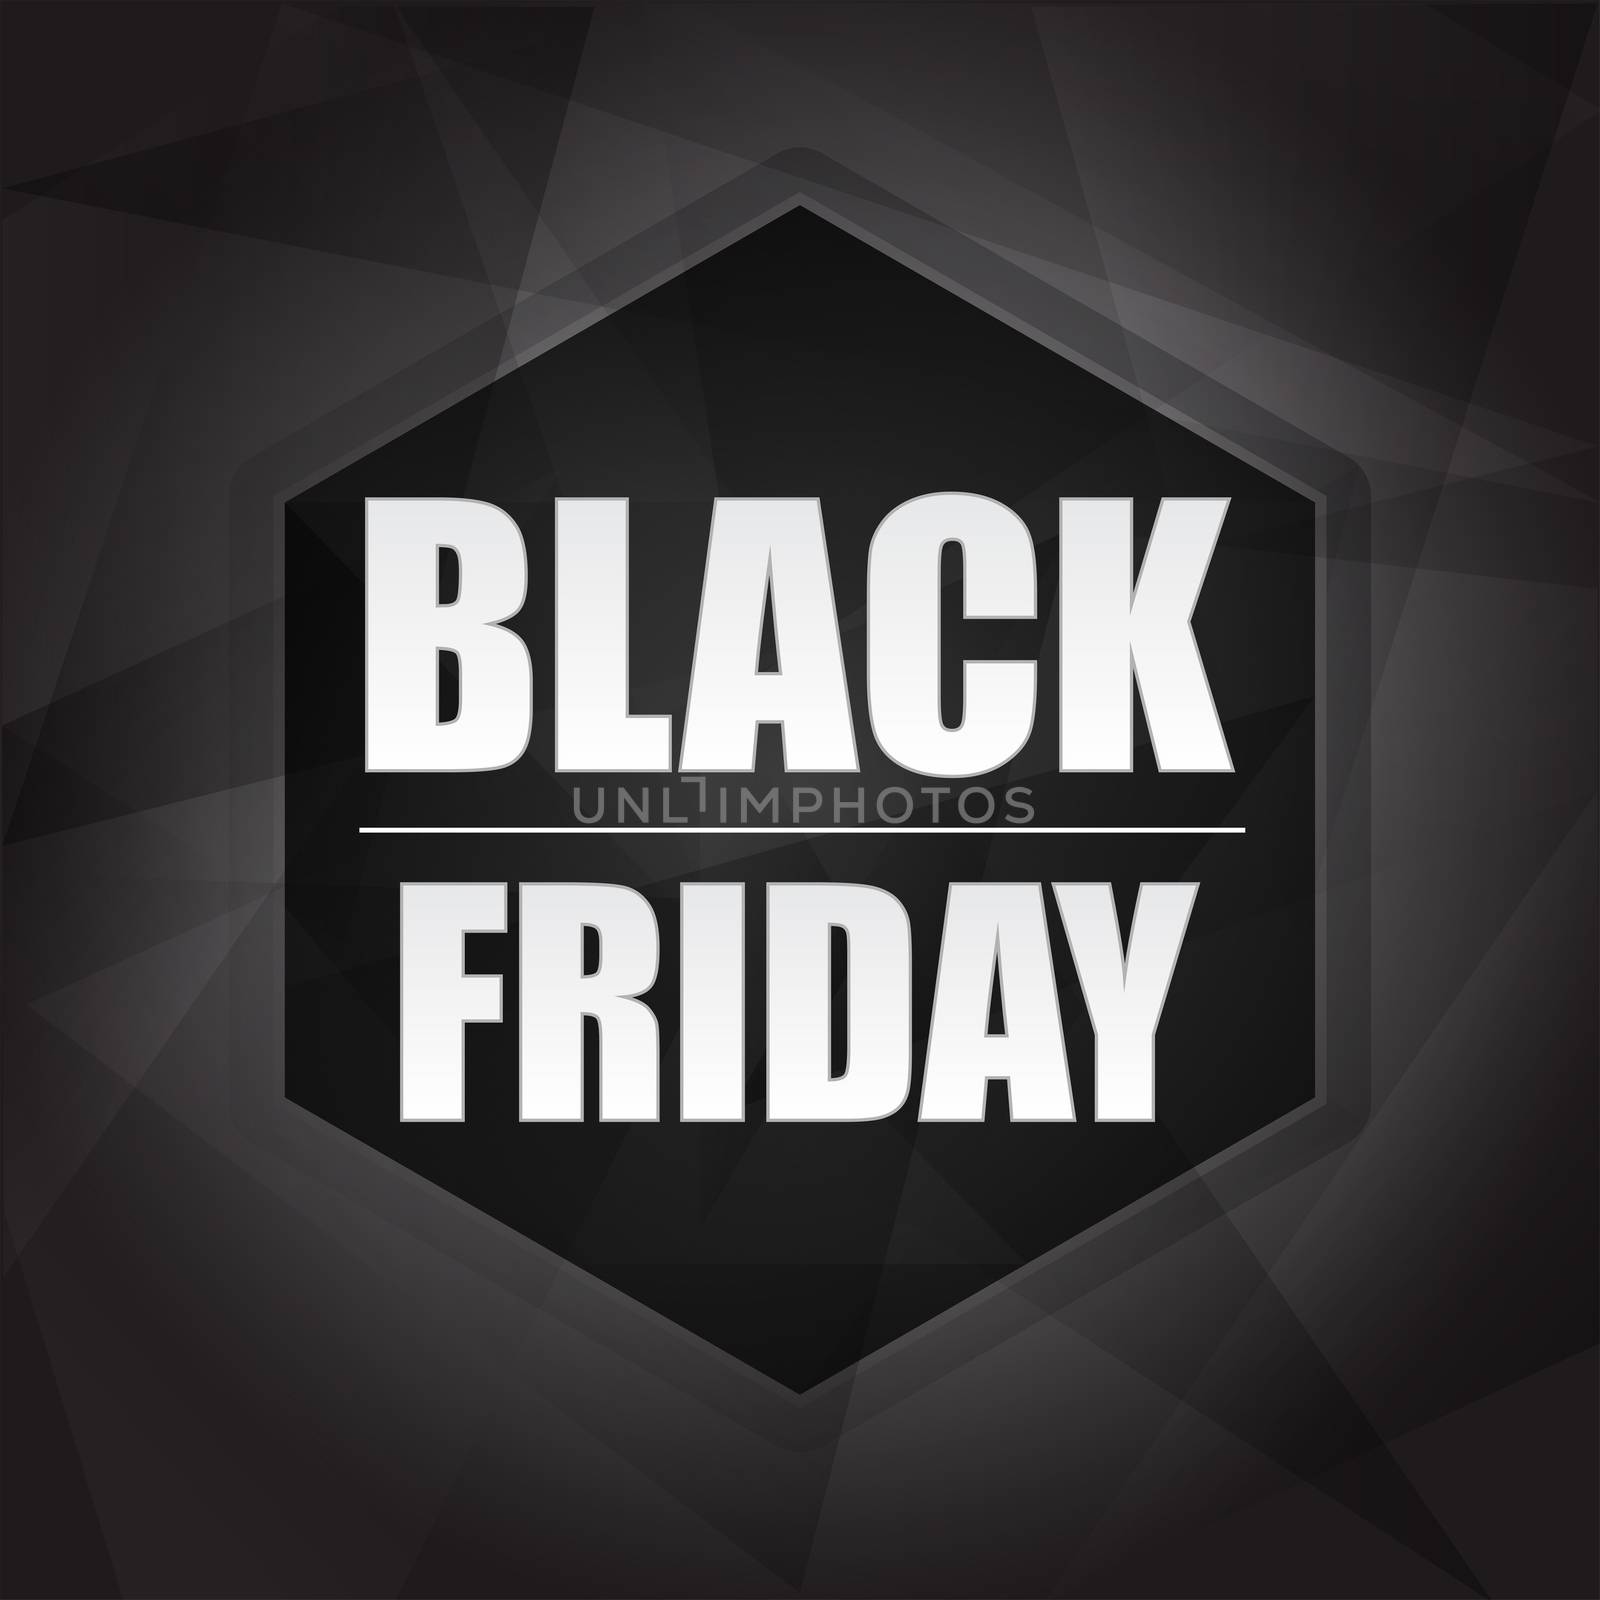 black friday sale banner - black label with hexagon and text, business holiday concept